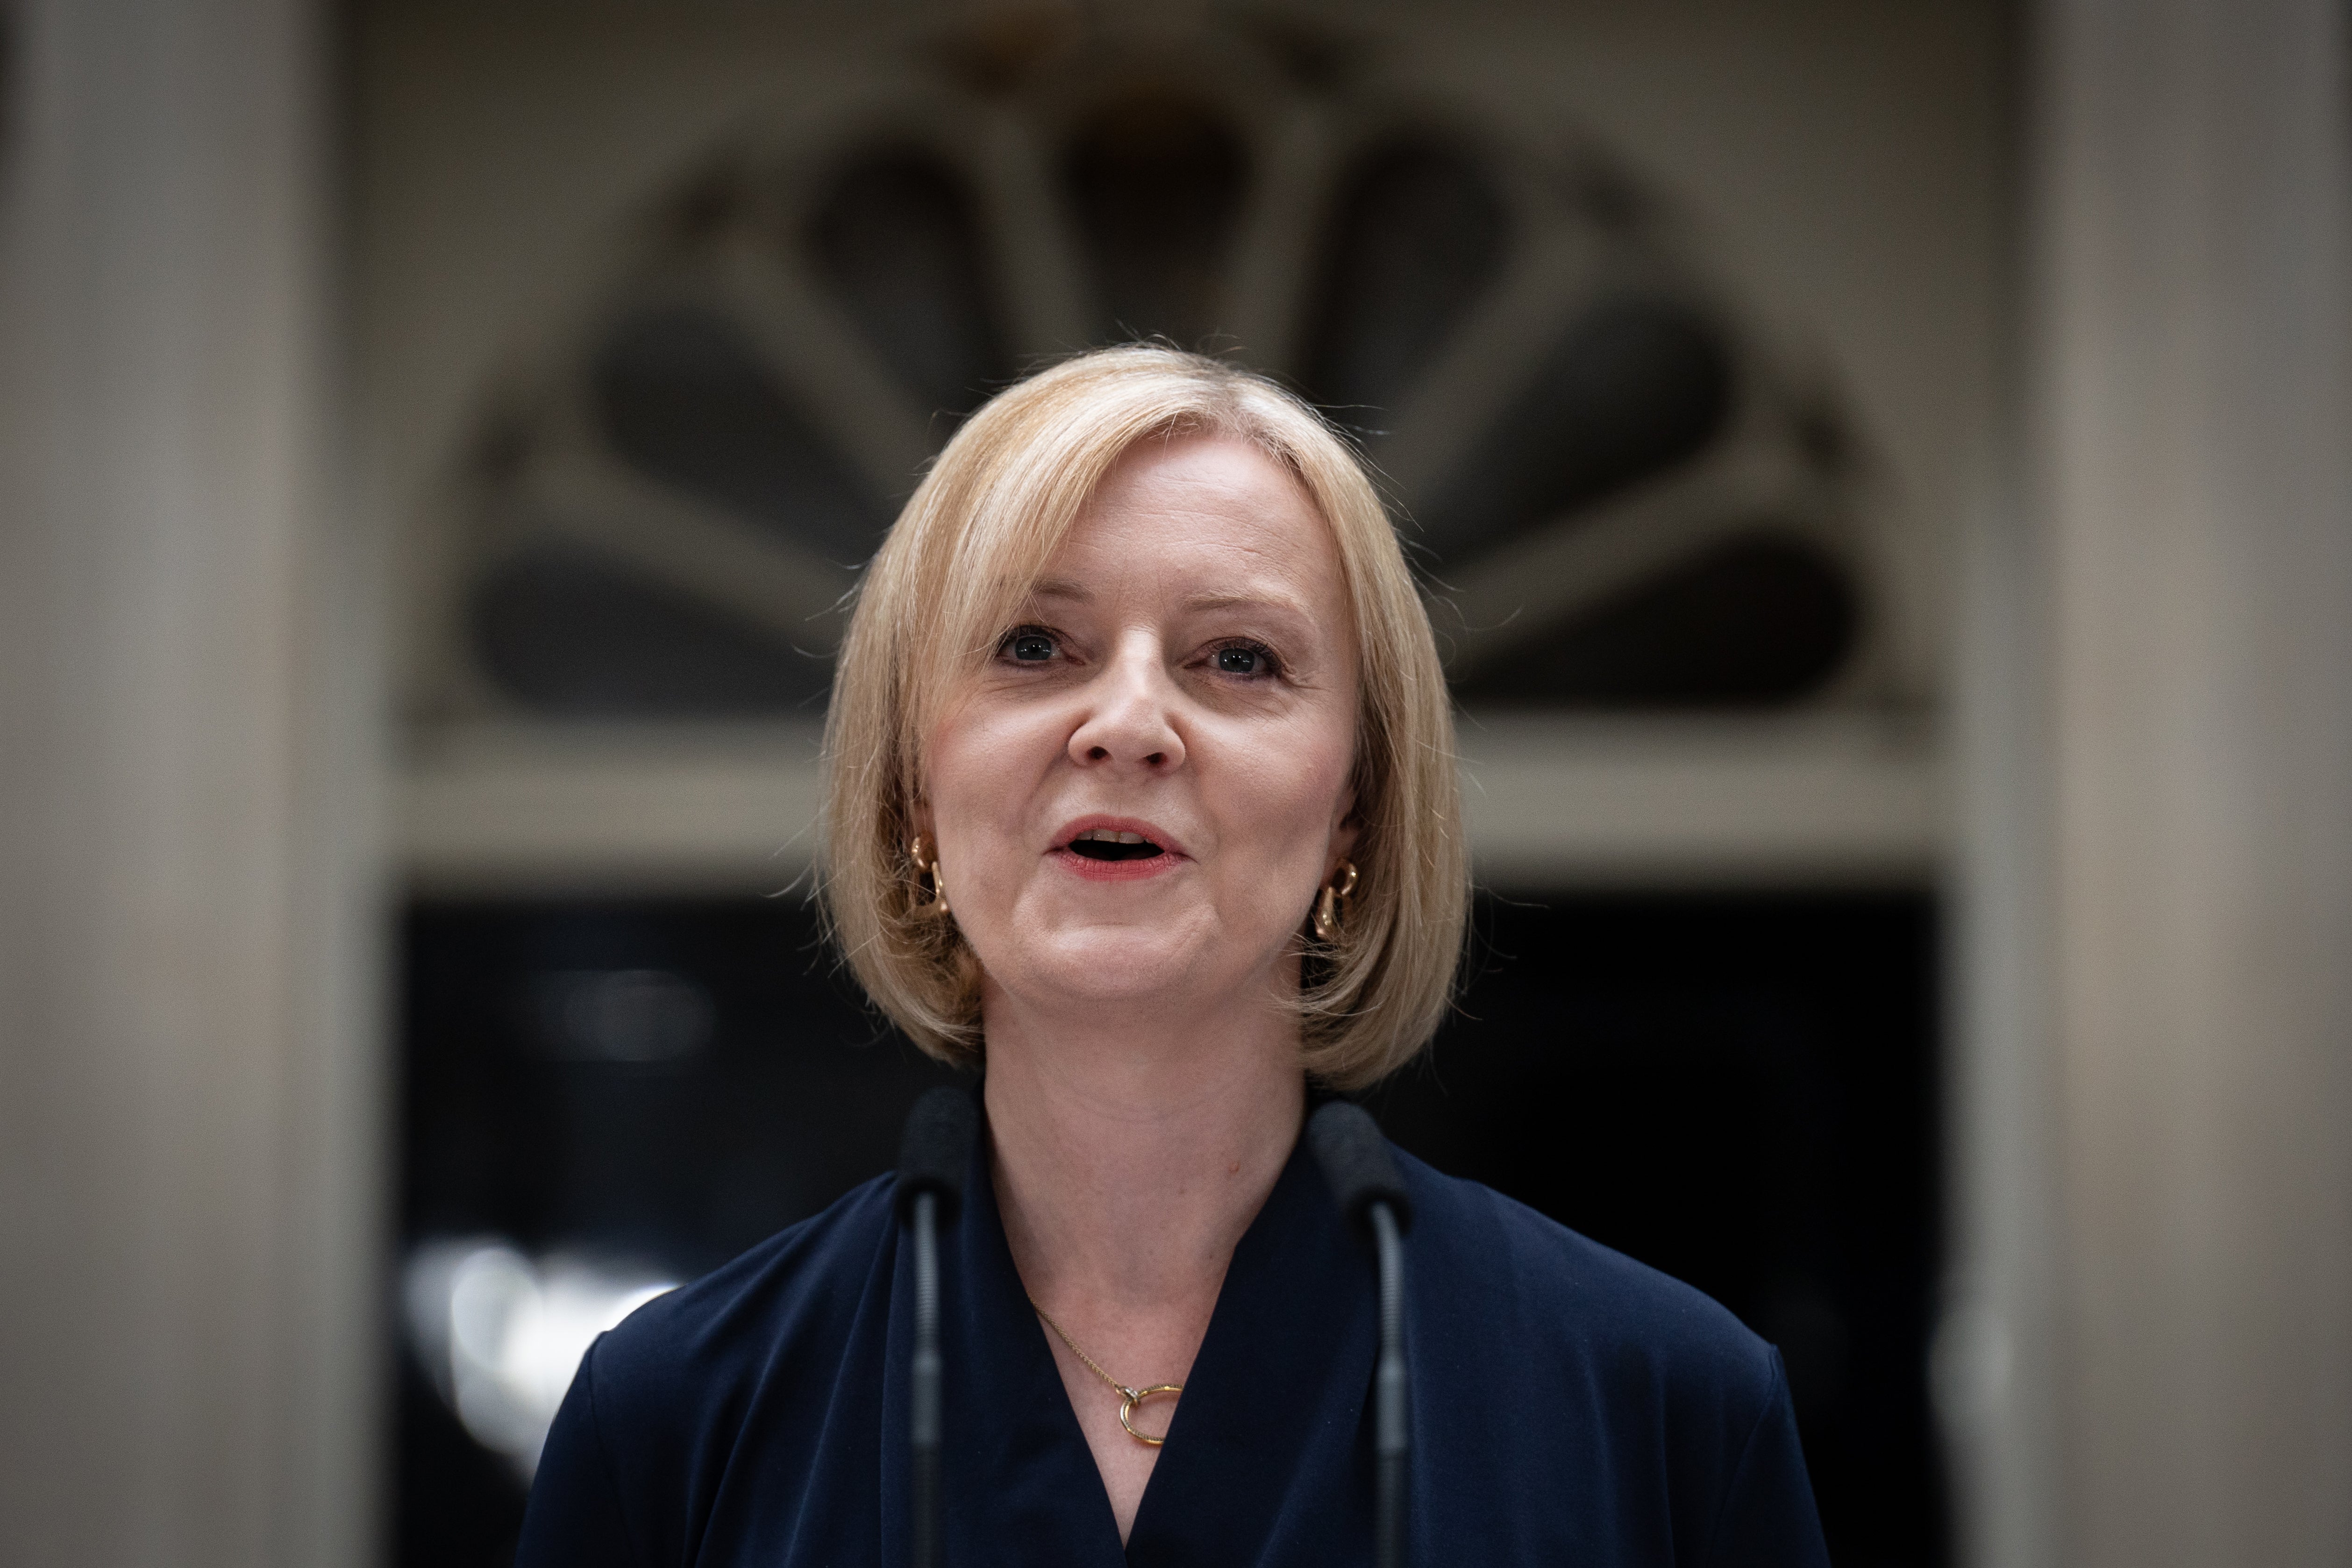 New Prime Minister Liz Truss makes a speech outside 10 Downing Street, London, after meeting Queen Elizabeth II and accepting her invitation to become Prime Minister and form a new government. Picture date: Tuesday September 6, 2022 (Stefan Rousseau/PA)